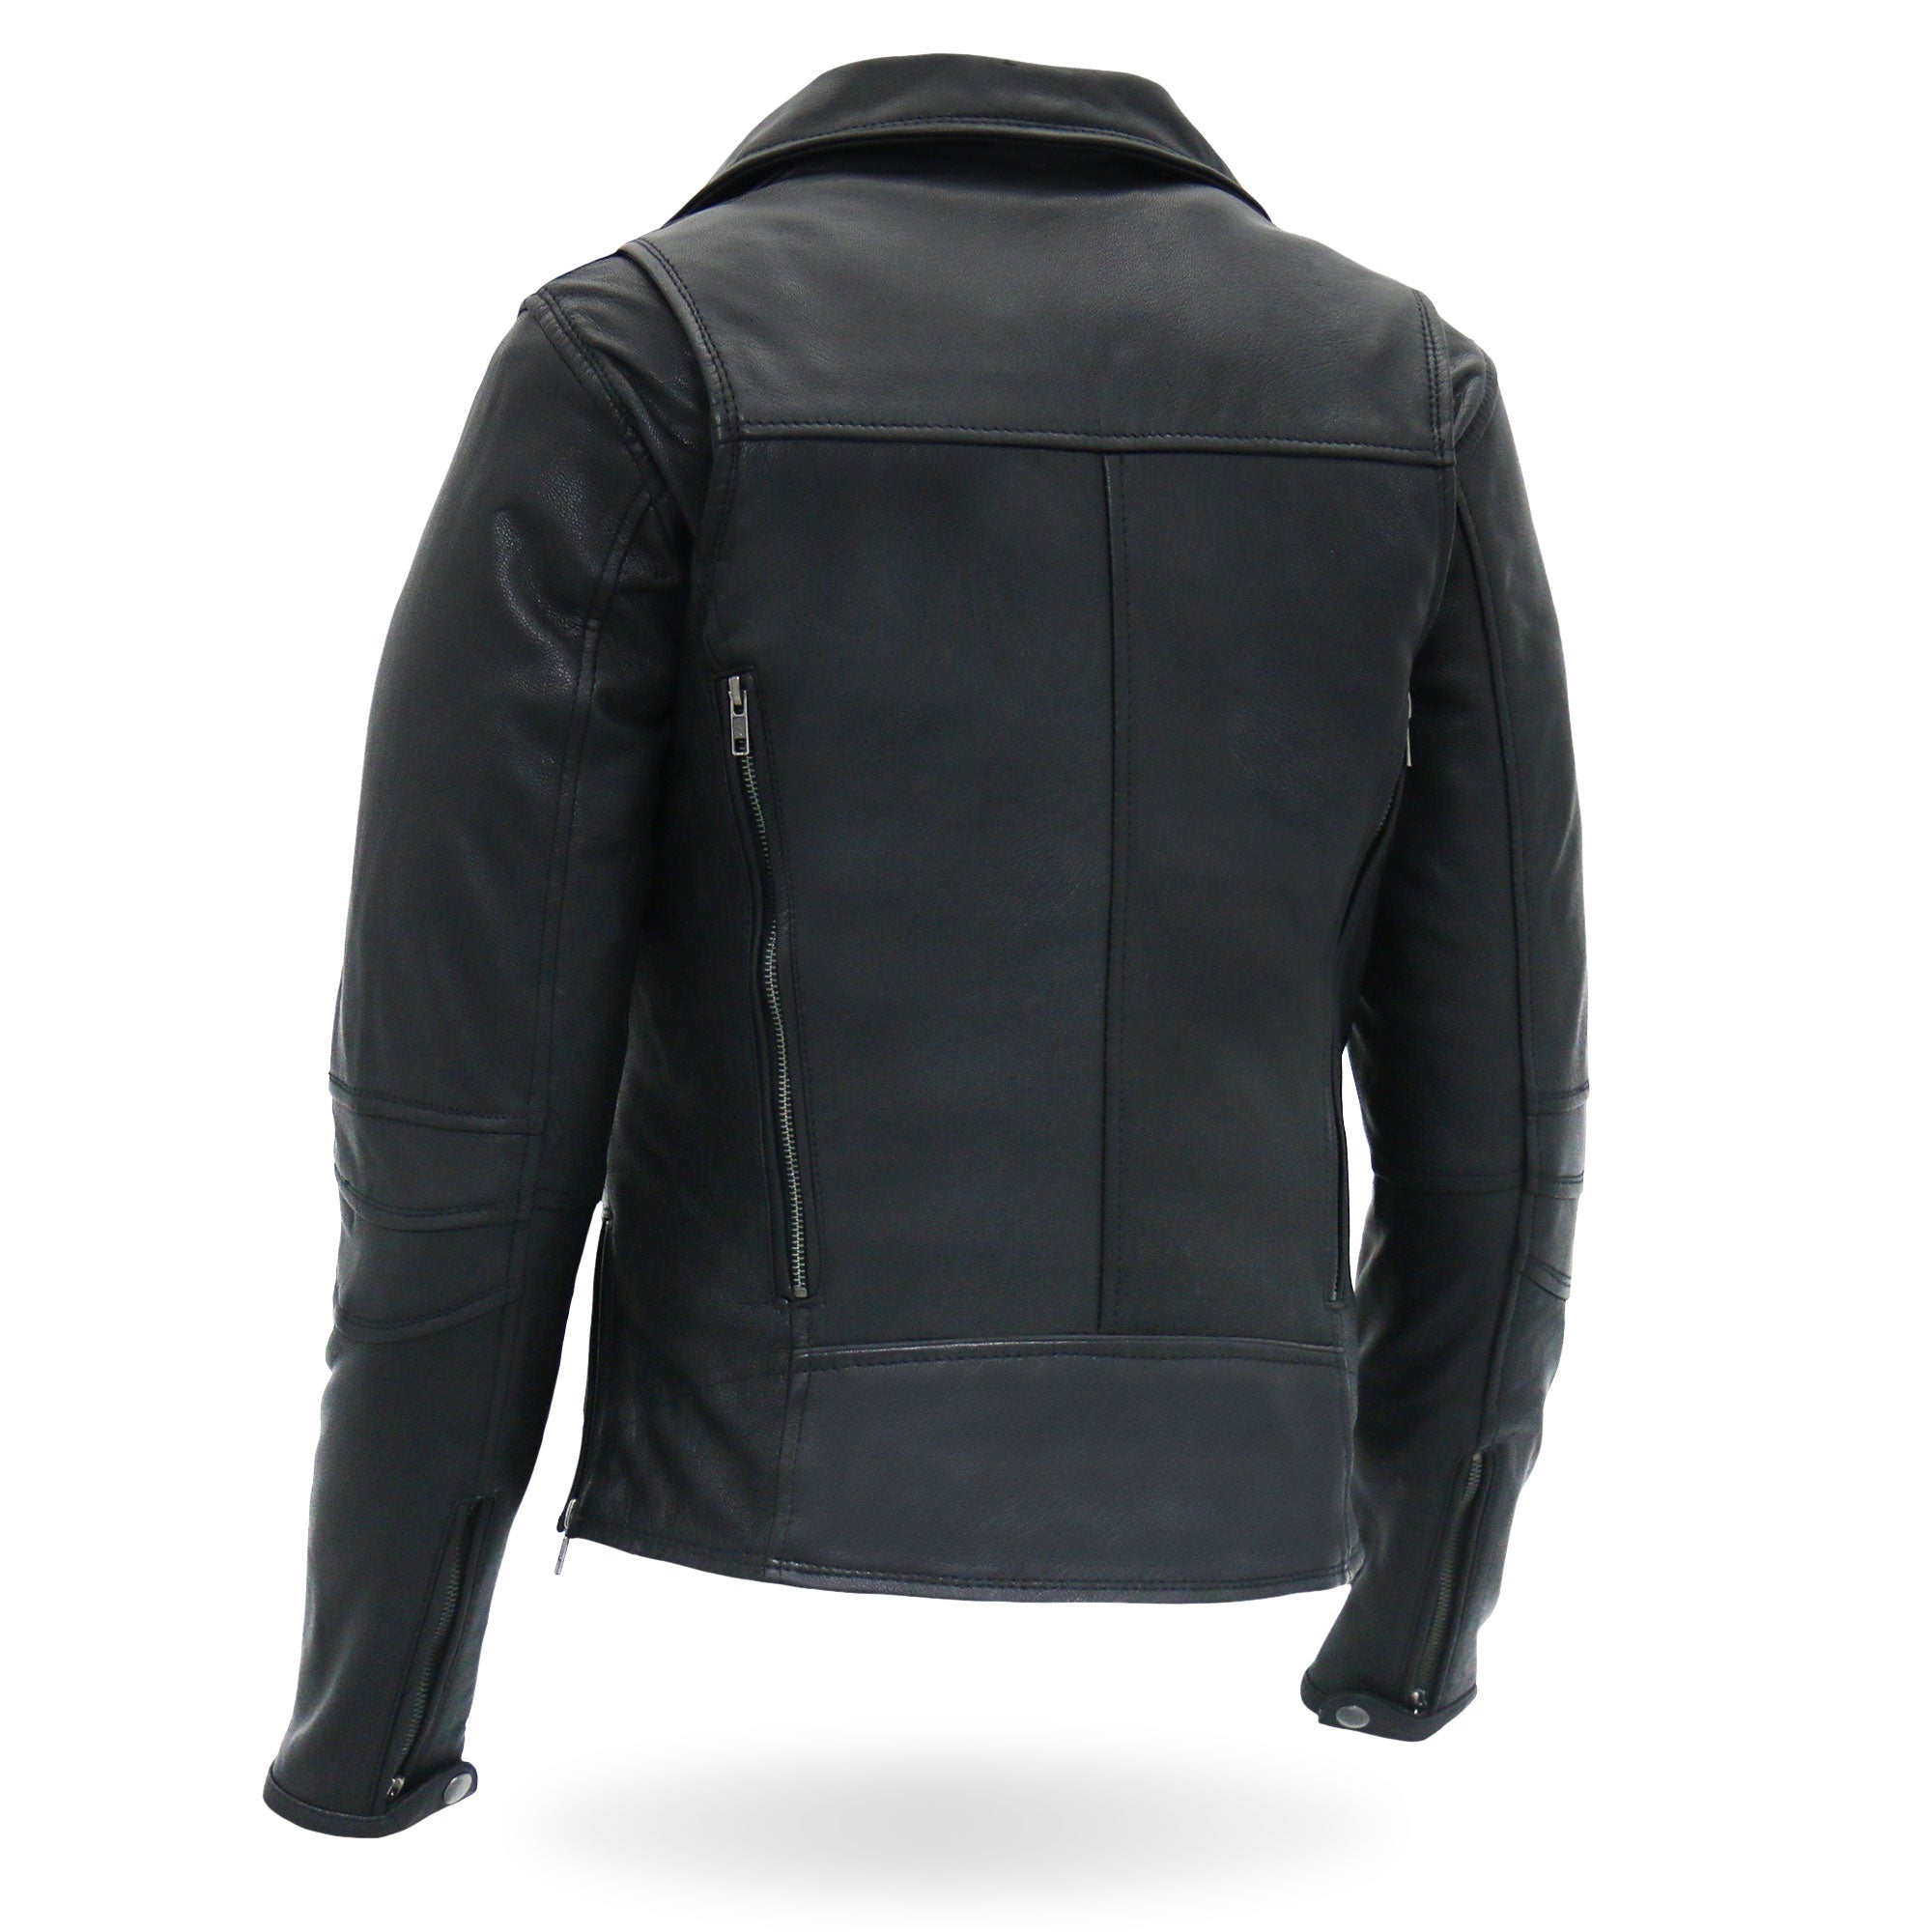 Hot Leathers JKL1029 Ladies Leather Motorcycle Concealed carry Biker Jacket with Vents and Side Zippers